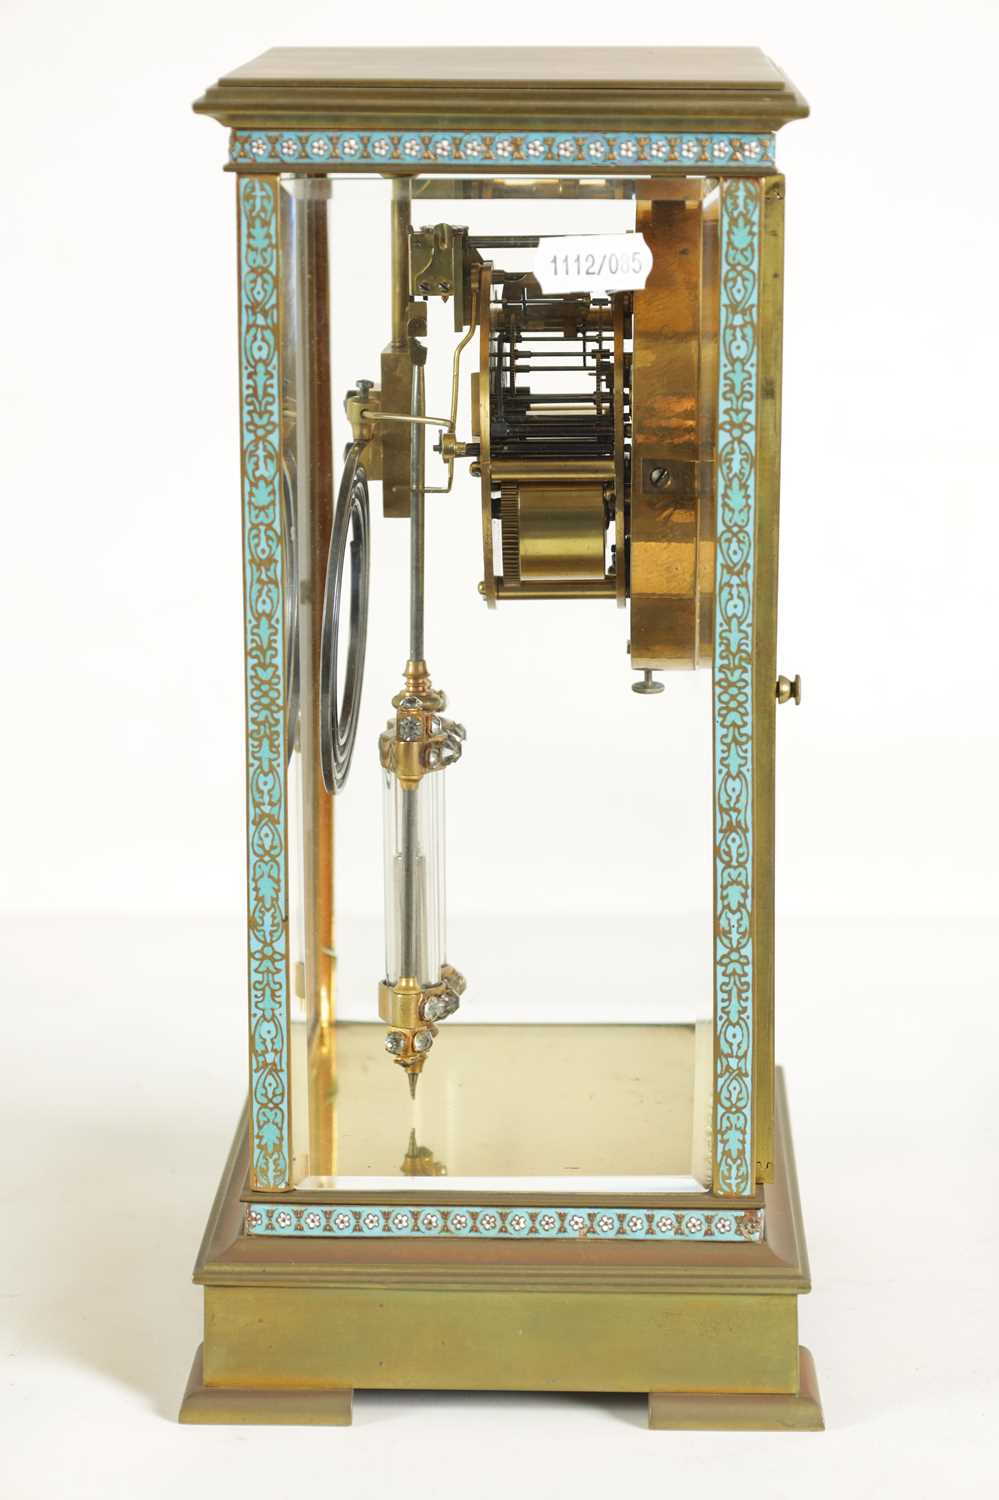 A LATE 19TH CENTURY FRENCH BRASS AND CHAMPLEVE ENAMEL FOUR-GLASS MANTEL CLOCK - Image 7 of 10